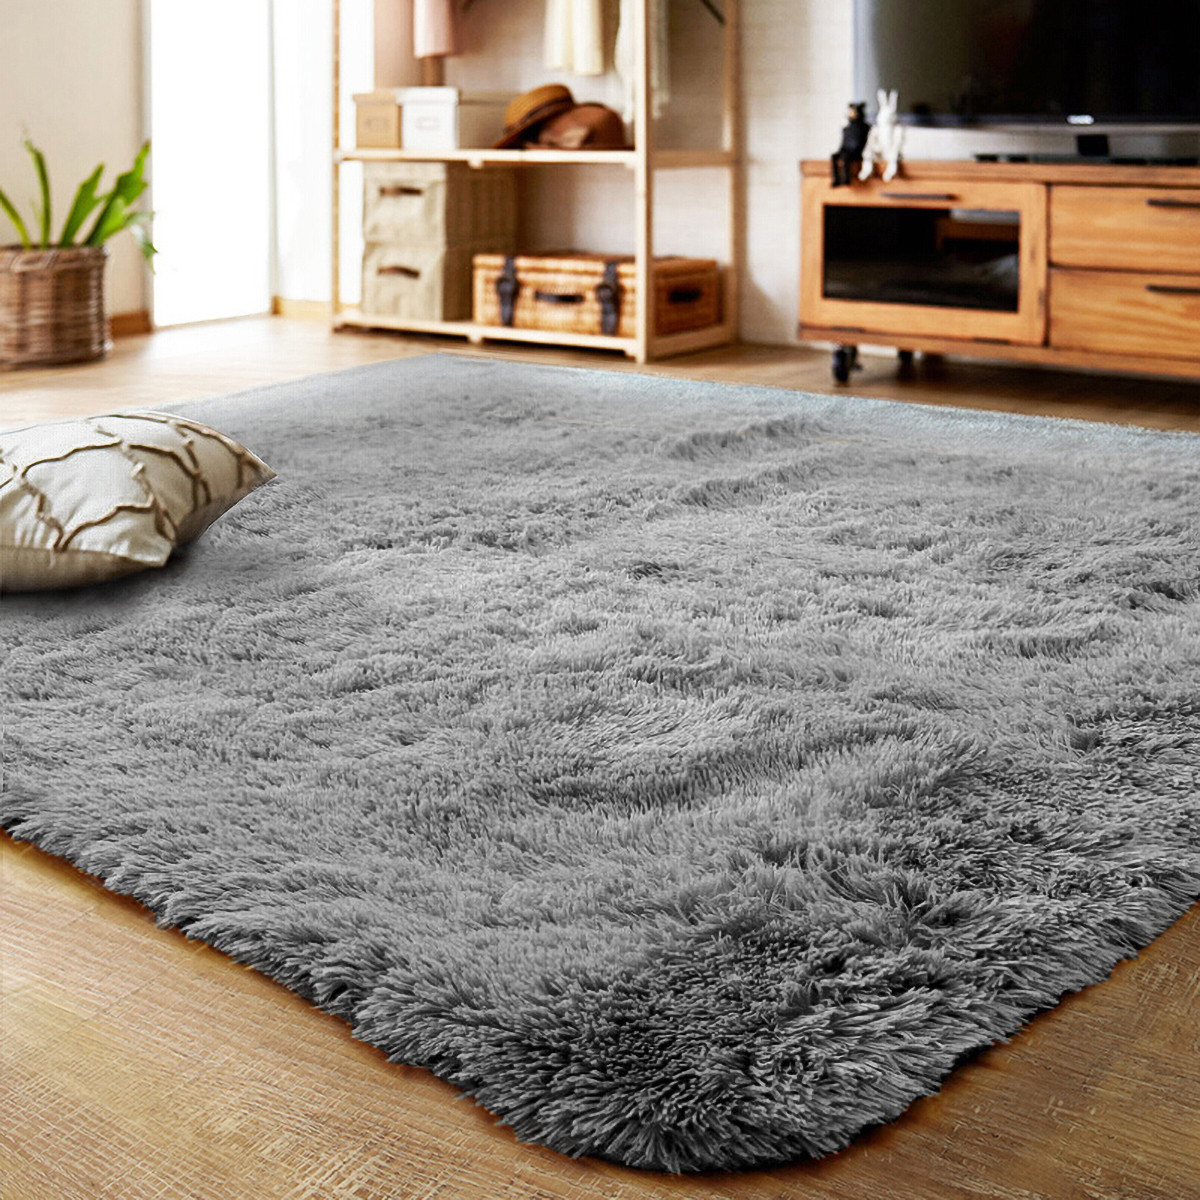 Large Rugs For Living Room
 LOCHAS Ultra Soft Indoor Modern Area Rugs Fluffy Living